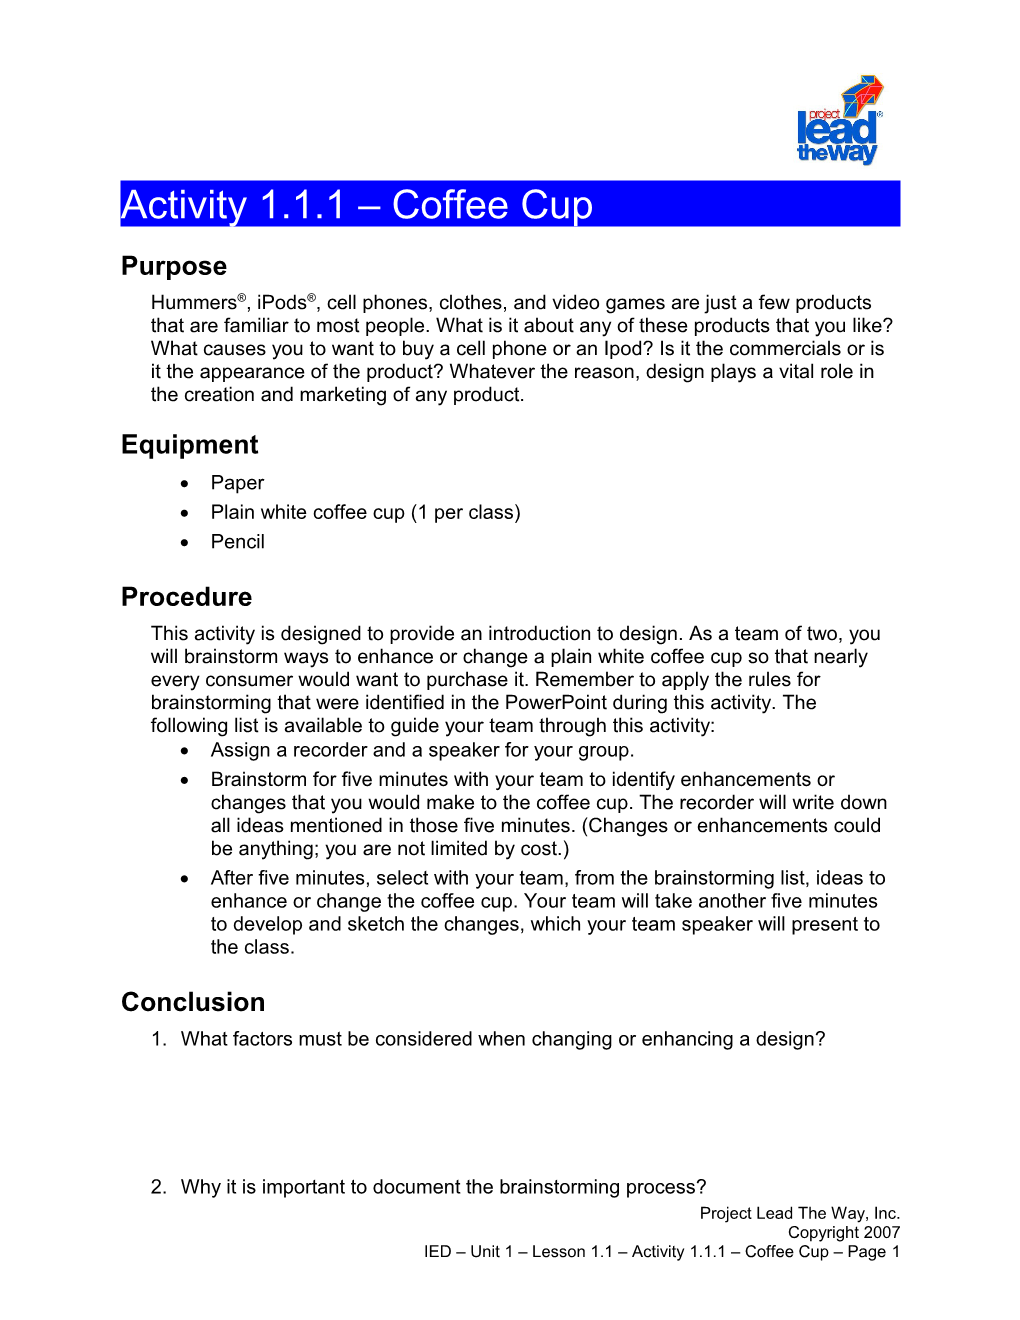 Activity 1.1.1: Coffee Cup